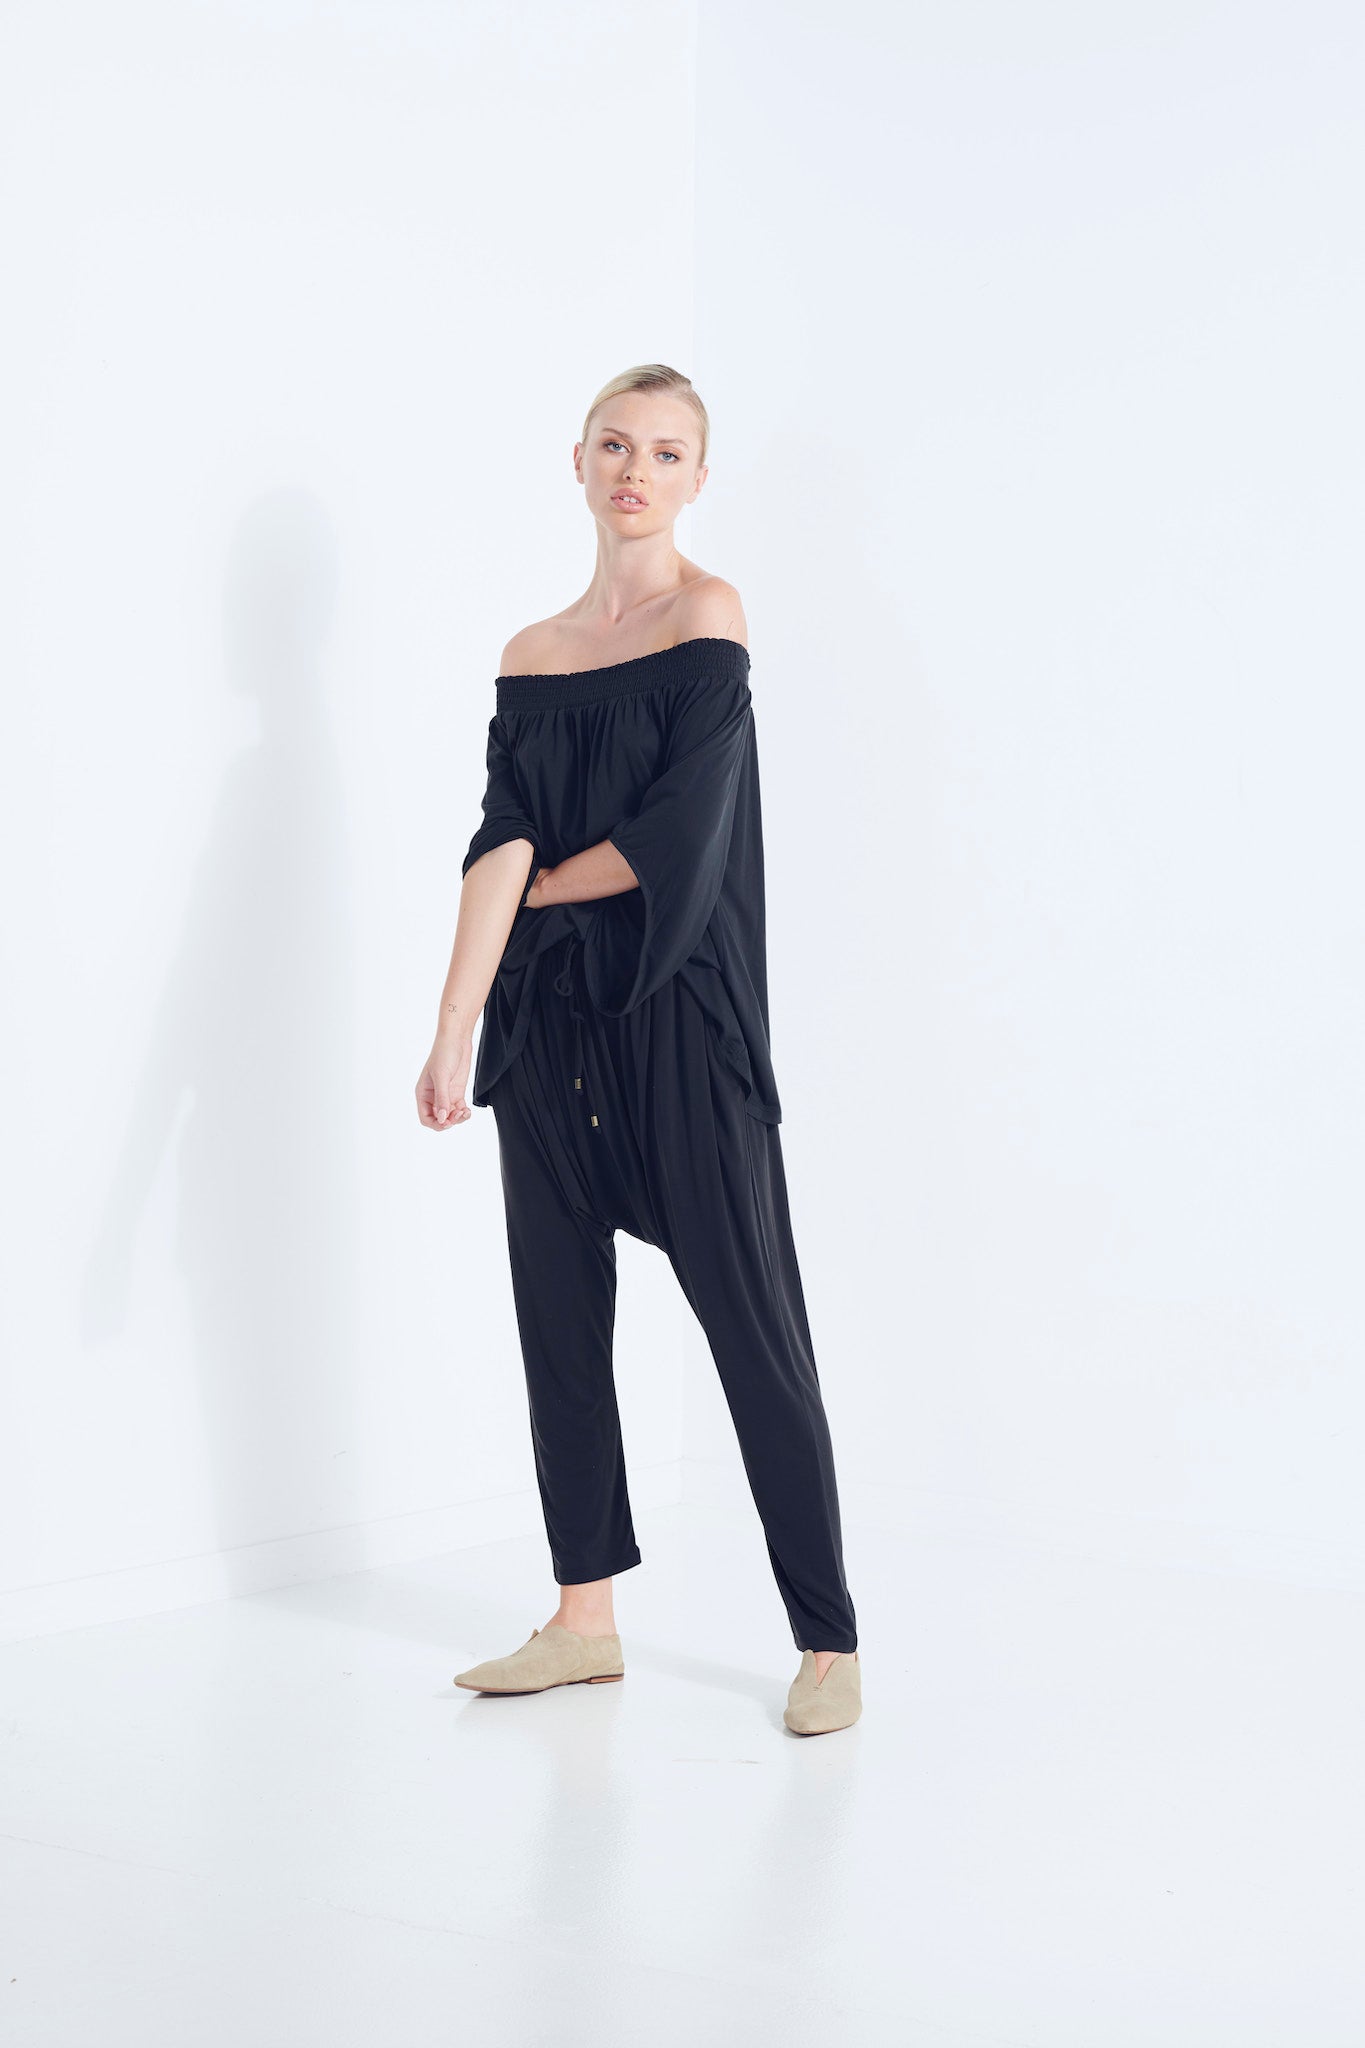 NAEVIA OFF SHOULDER TOP KNIT BEECHWOOD MODAL ELASTIC TOP WITH BELL SLEEVE WASHED BLACK DARK RELAXED VIEW